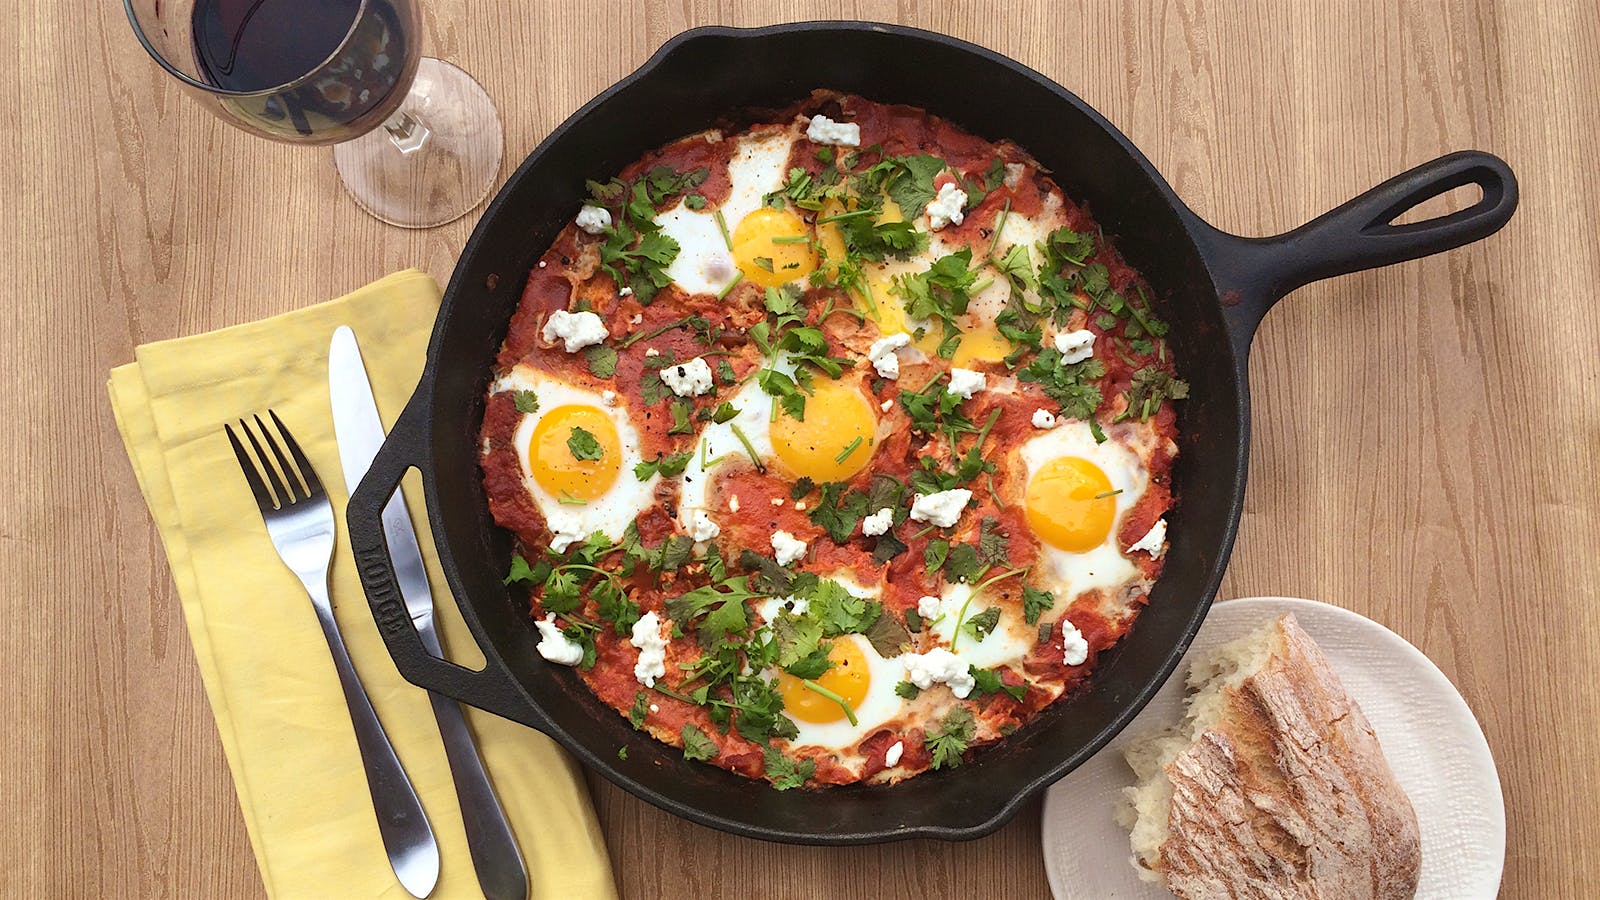 8 & $20: Farmers Market Shakshuka With a Bubbly Summer Red